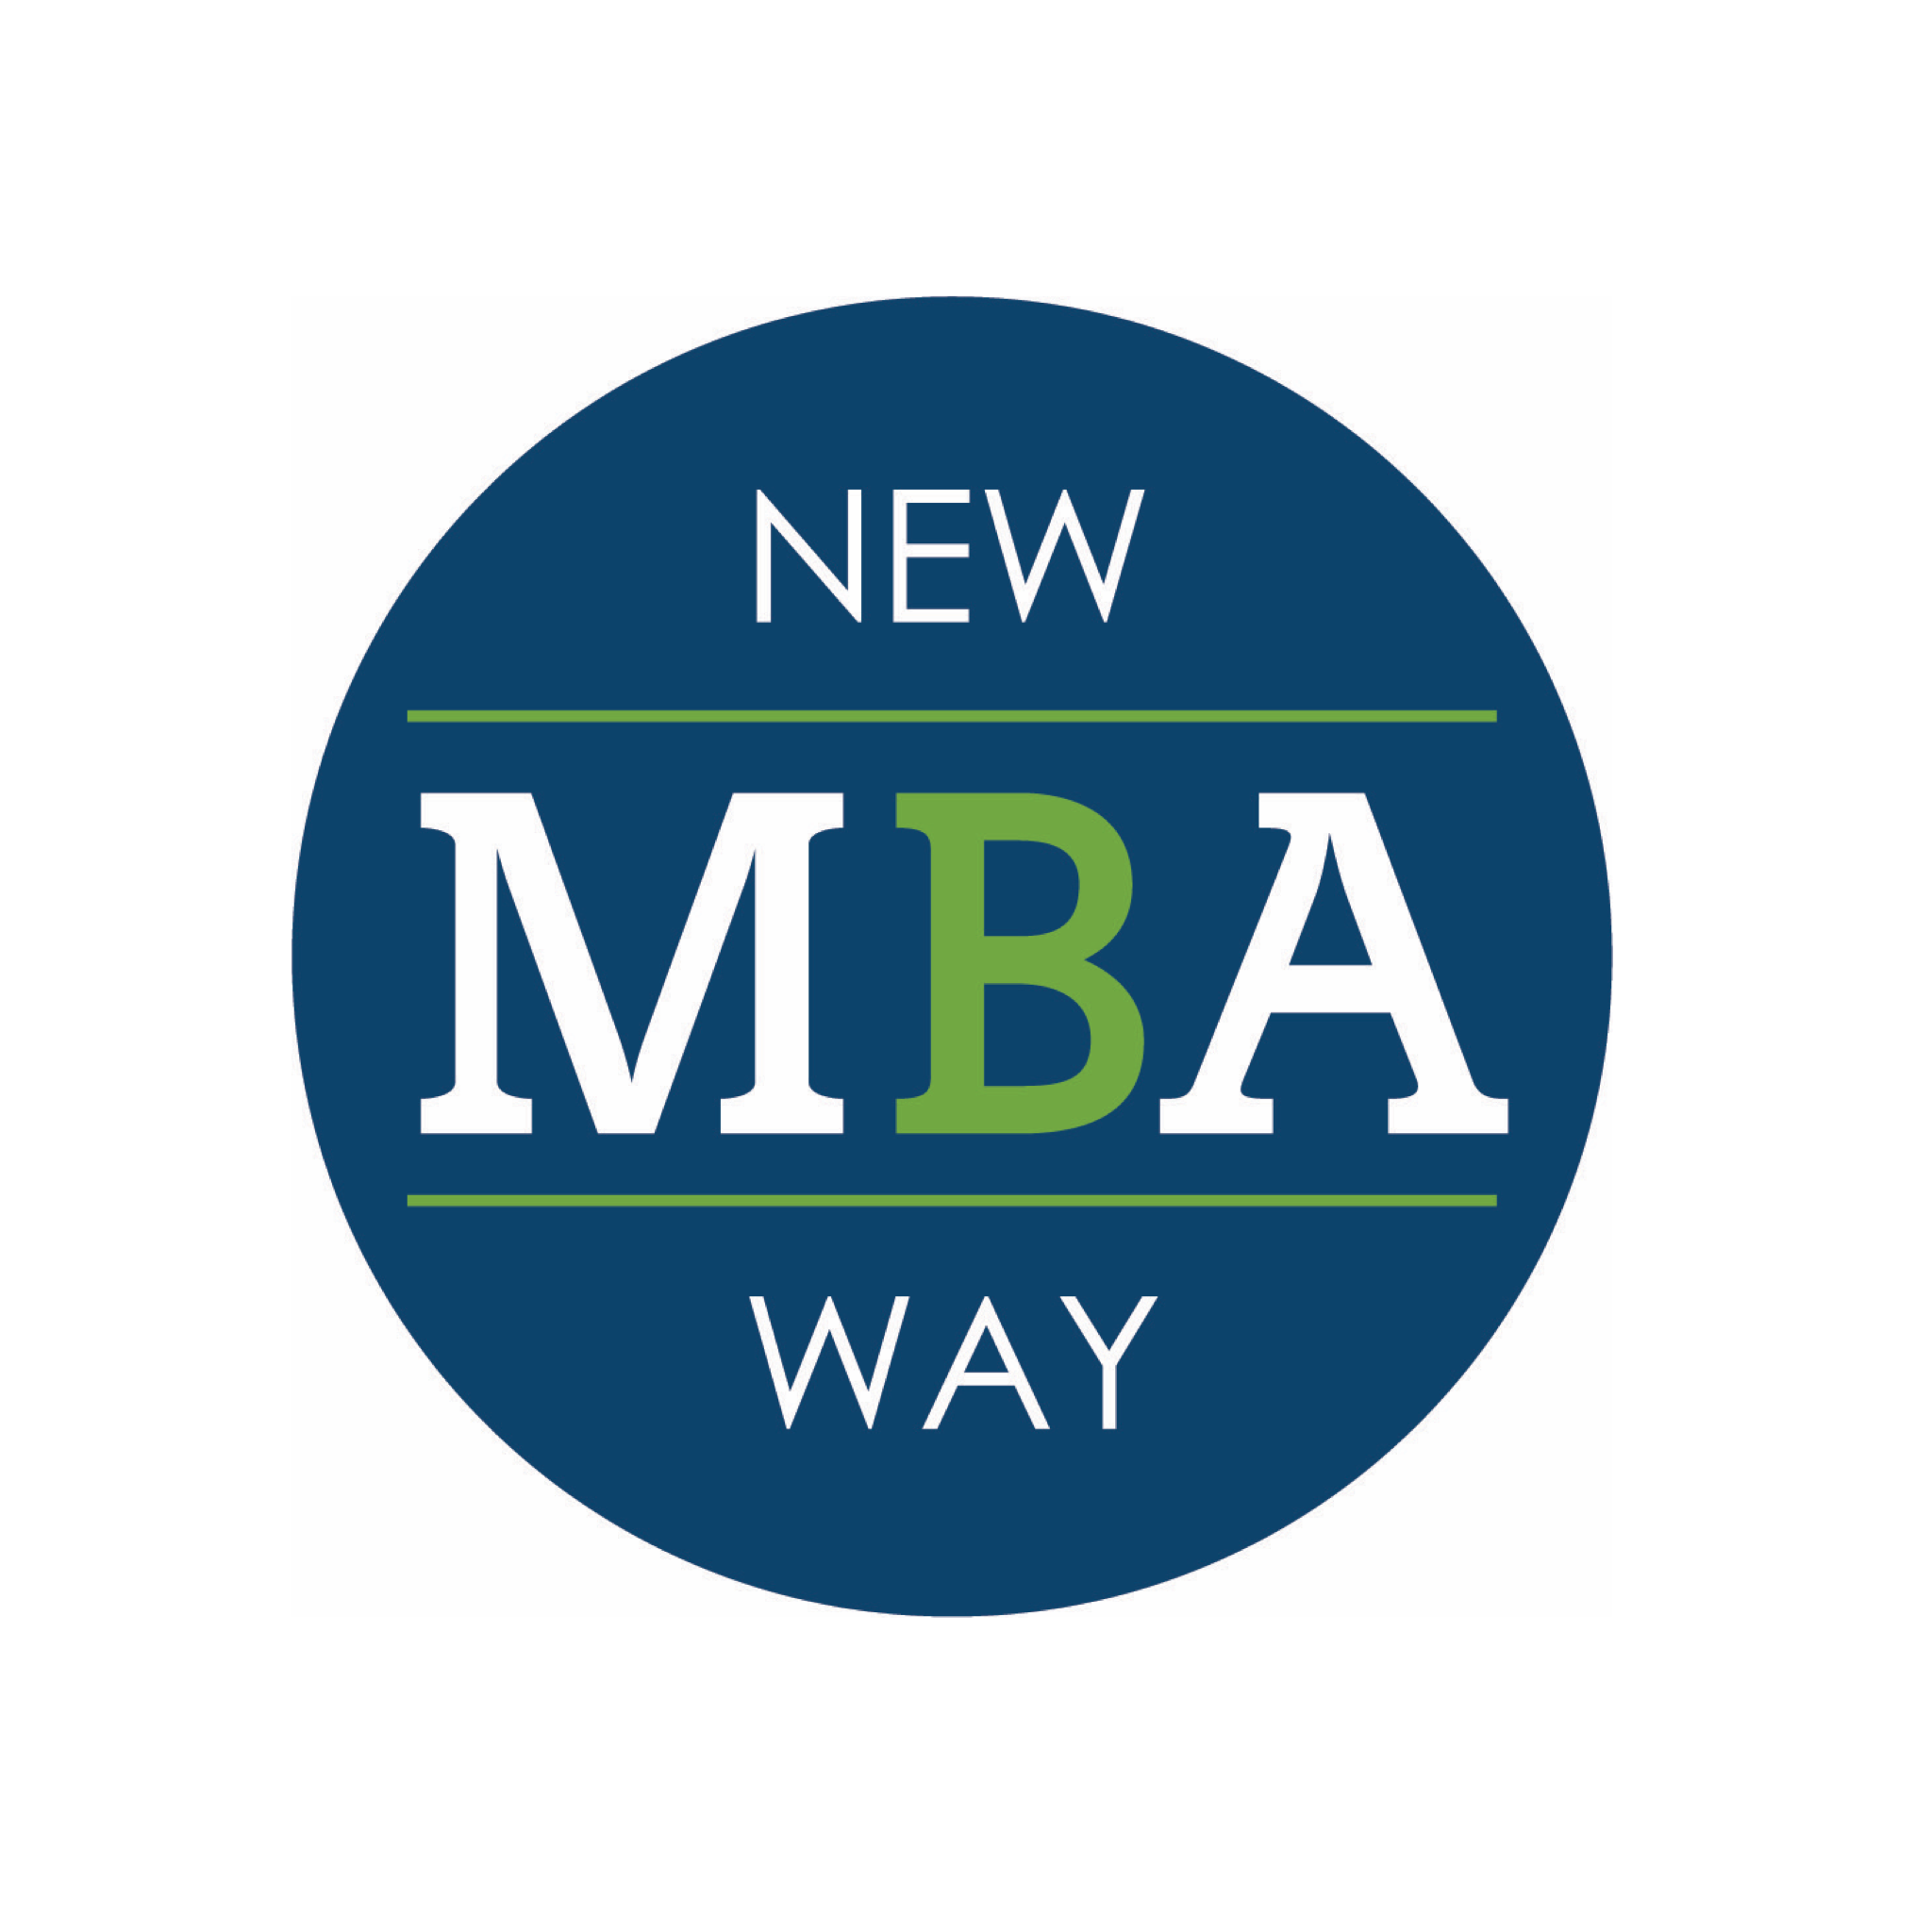 Bonvera is thrilled to launch a new education system, New Way MBA.